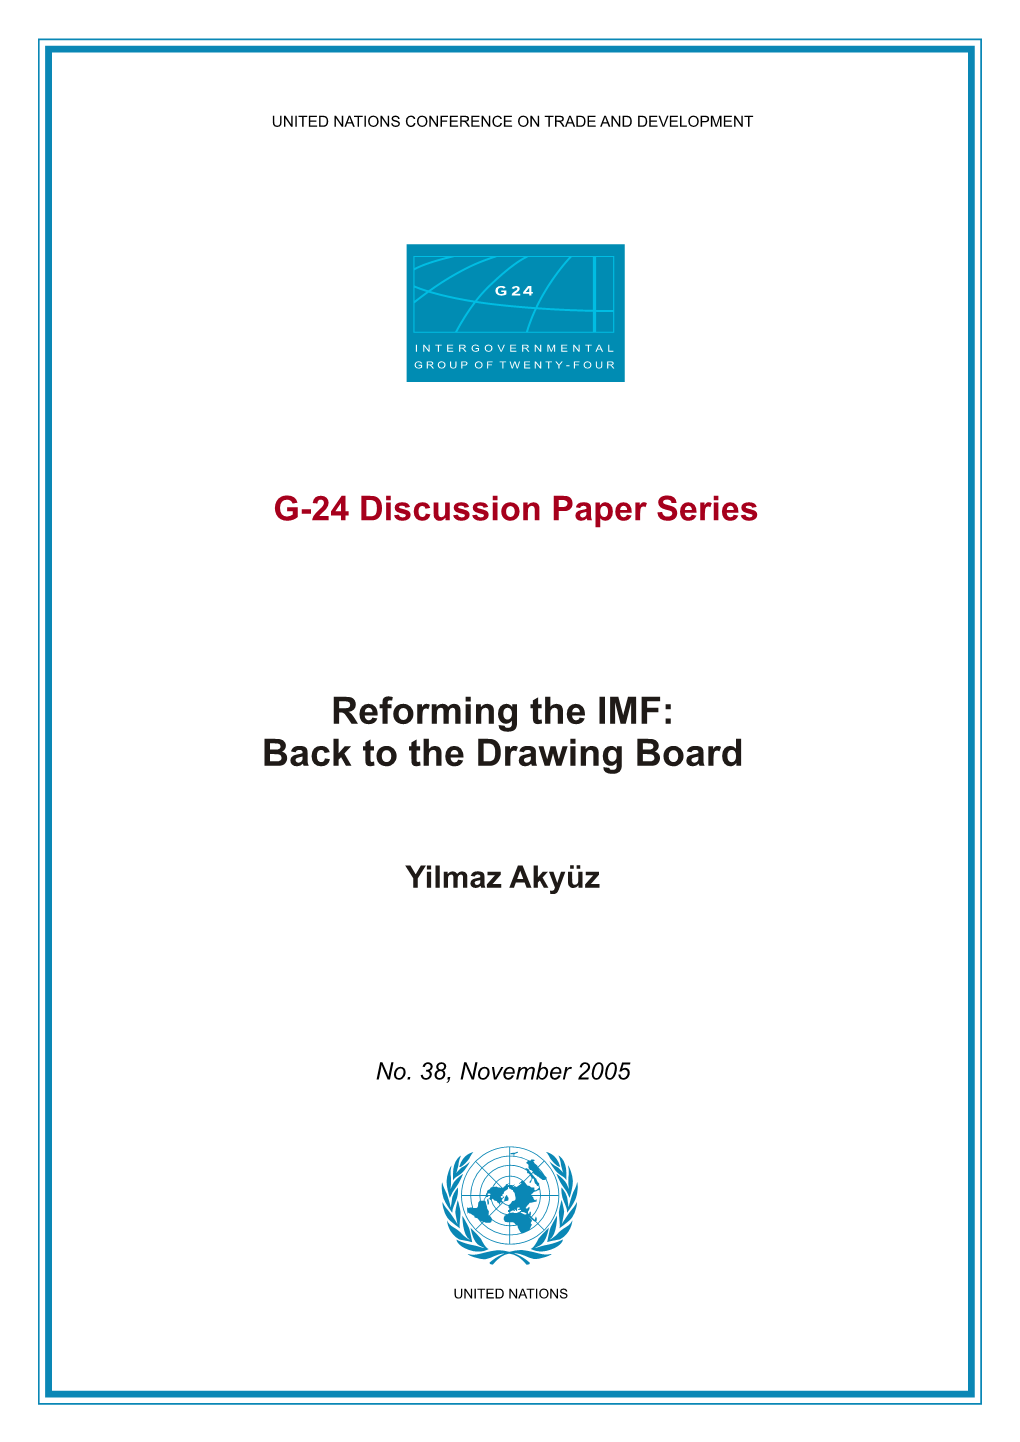 Reforming the IMF: Back to the Drawing Board